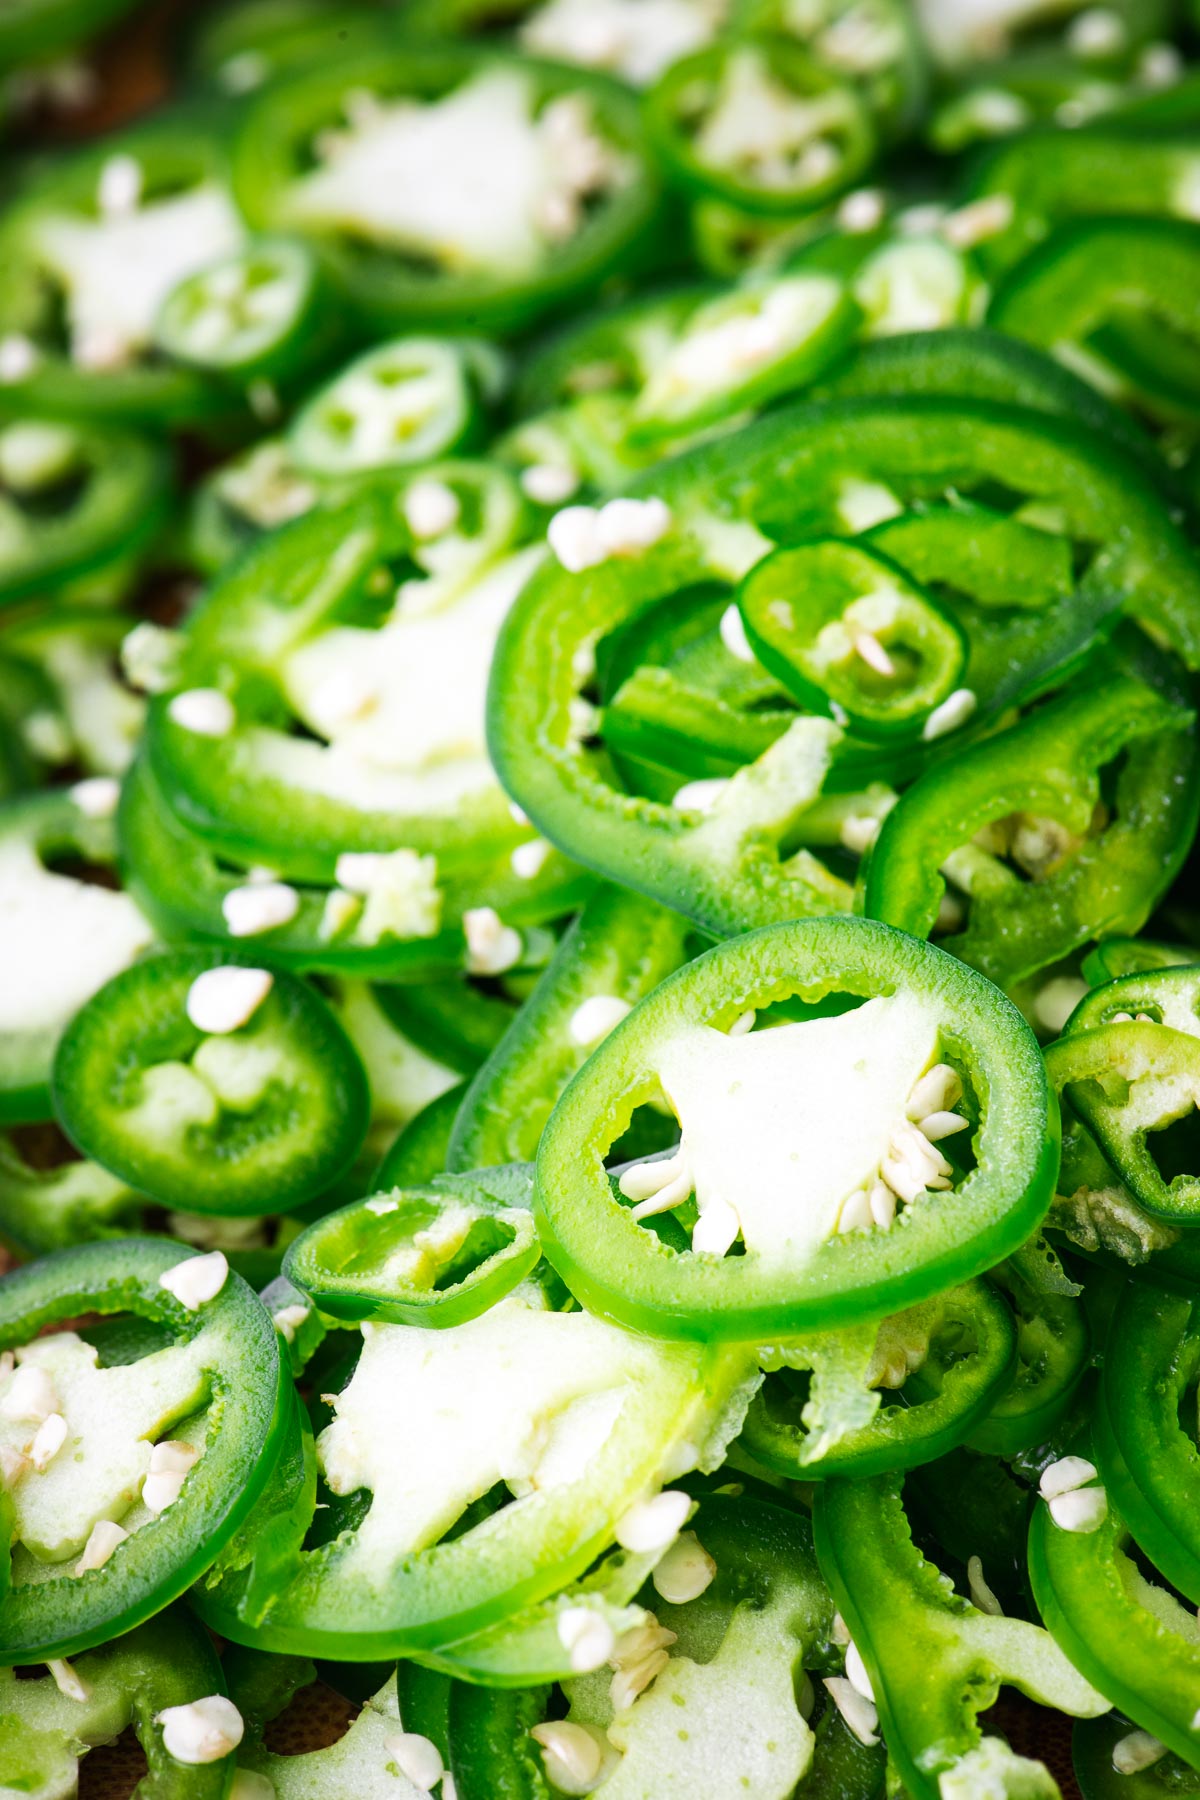 A close-up of thinly sliced mixed green chillies, such as jalapeños, serrano peppers and green finger chillies.